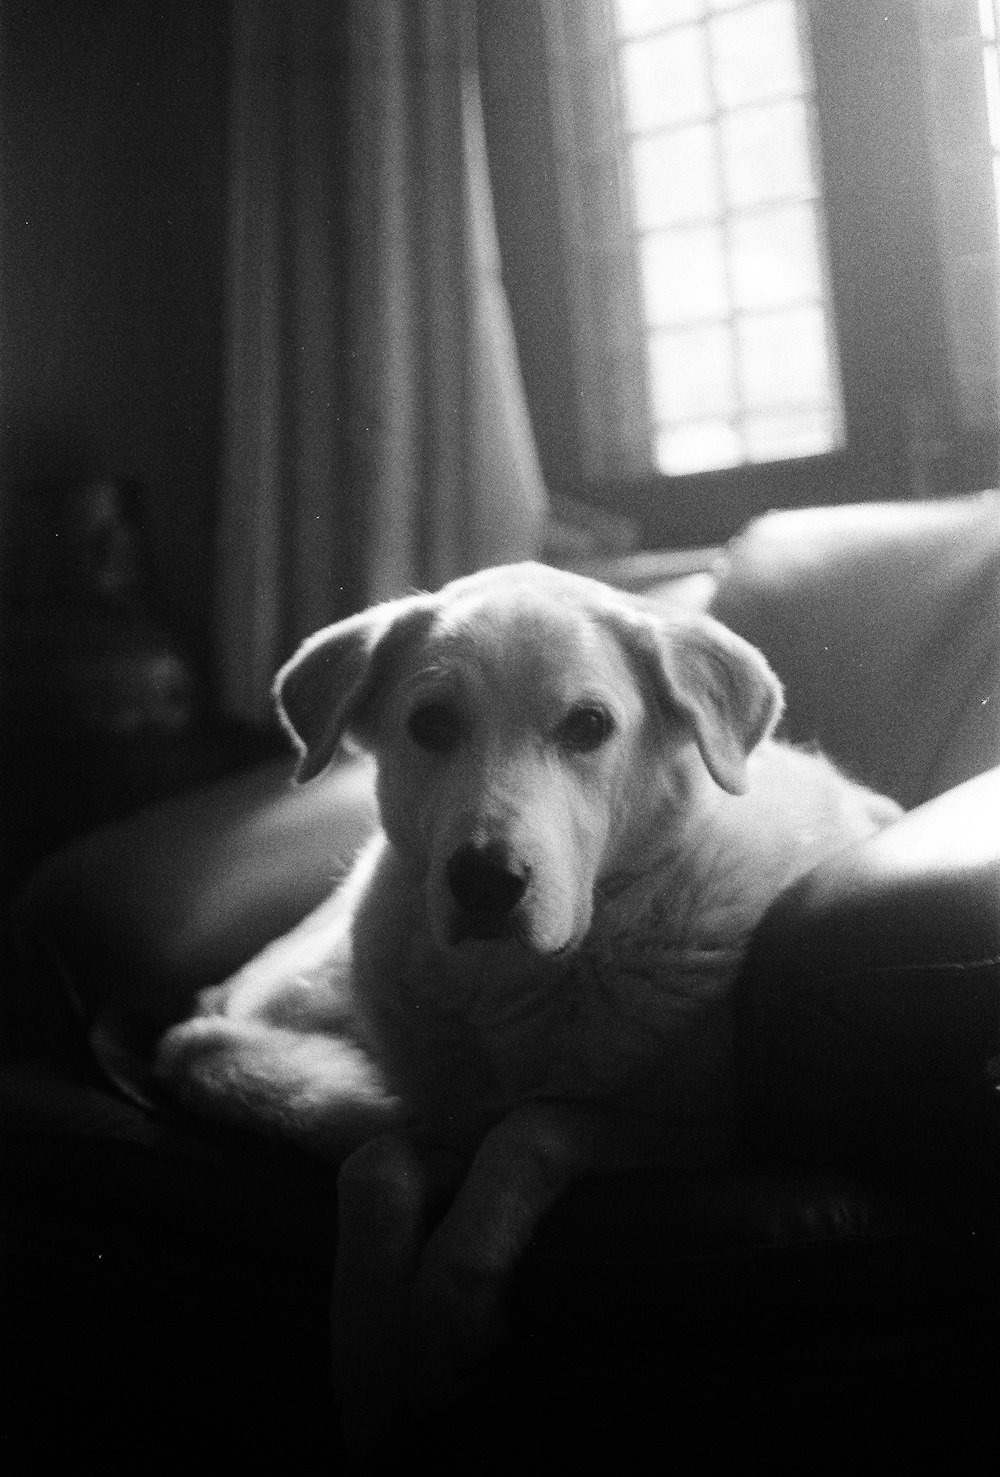 a black and white photo of a dog sitting on a couch